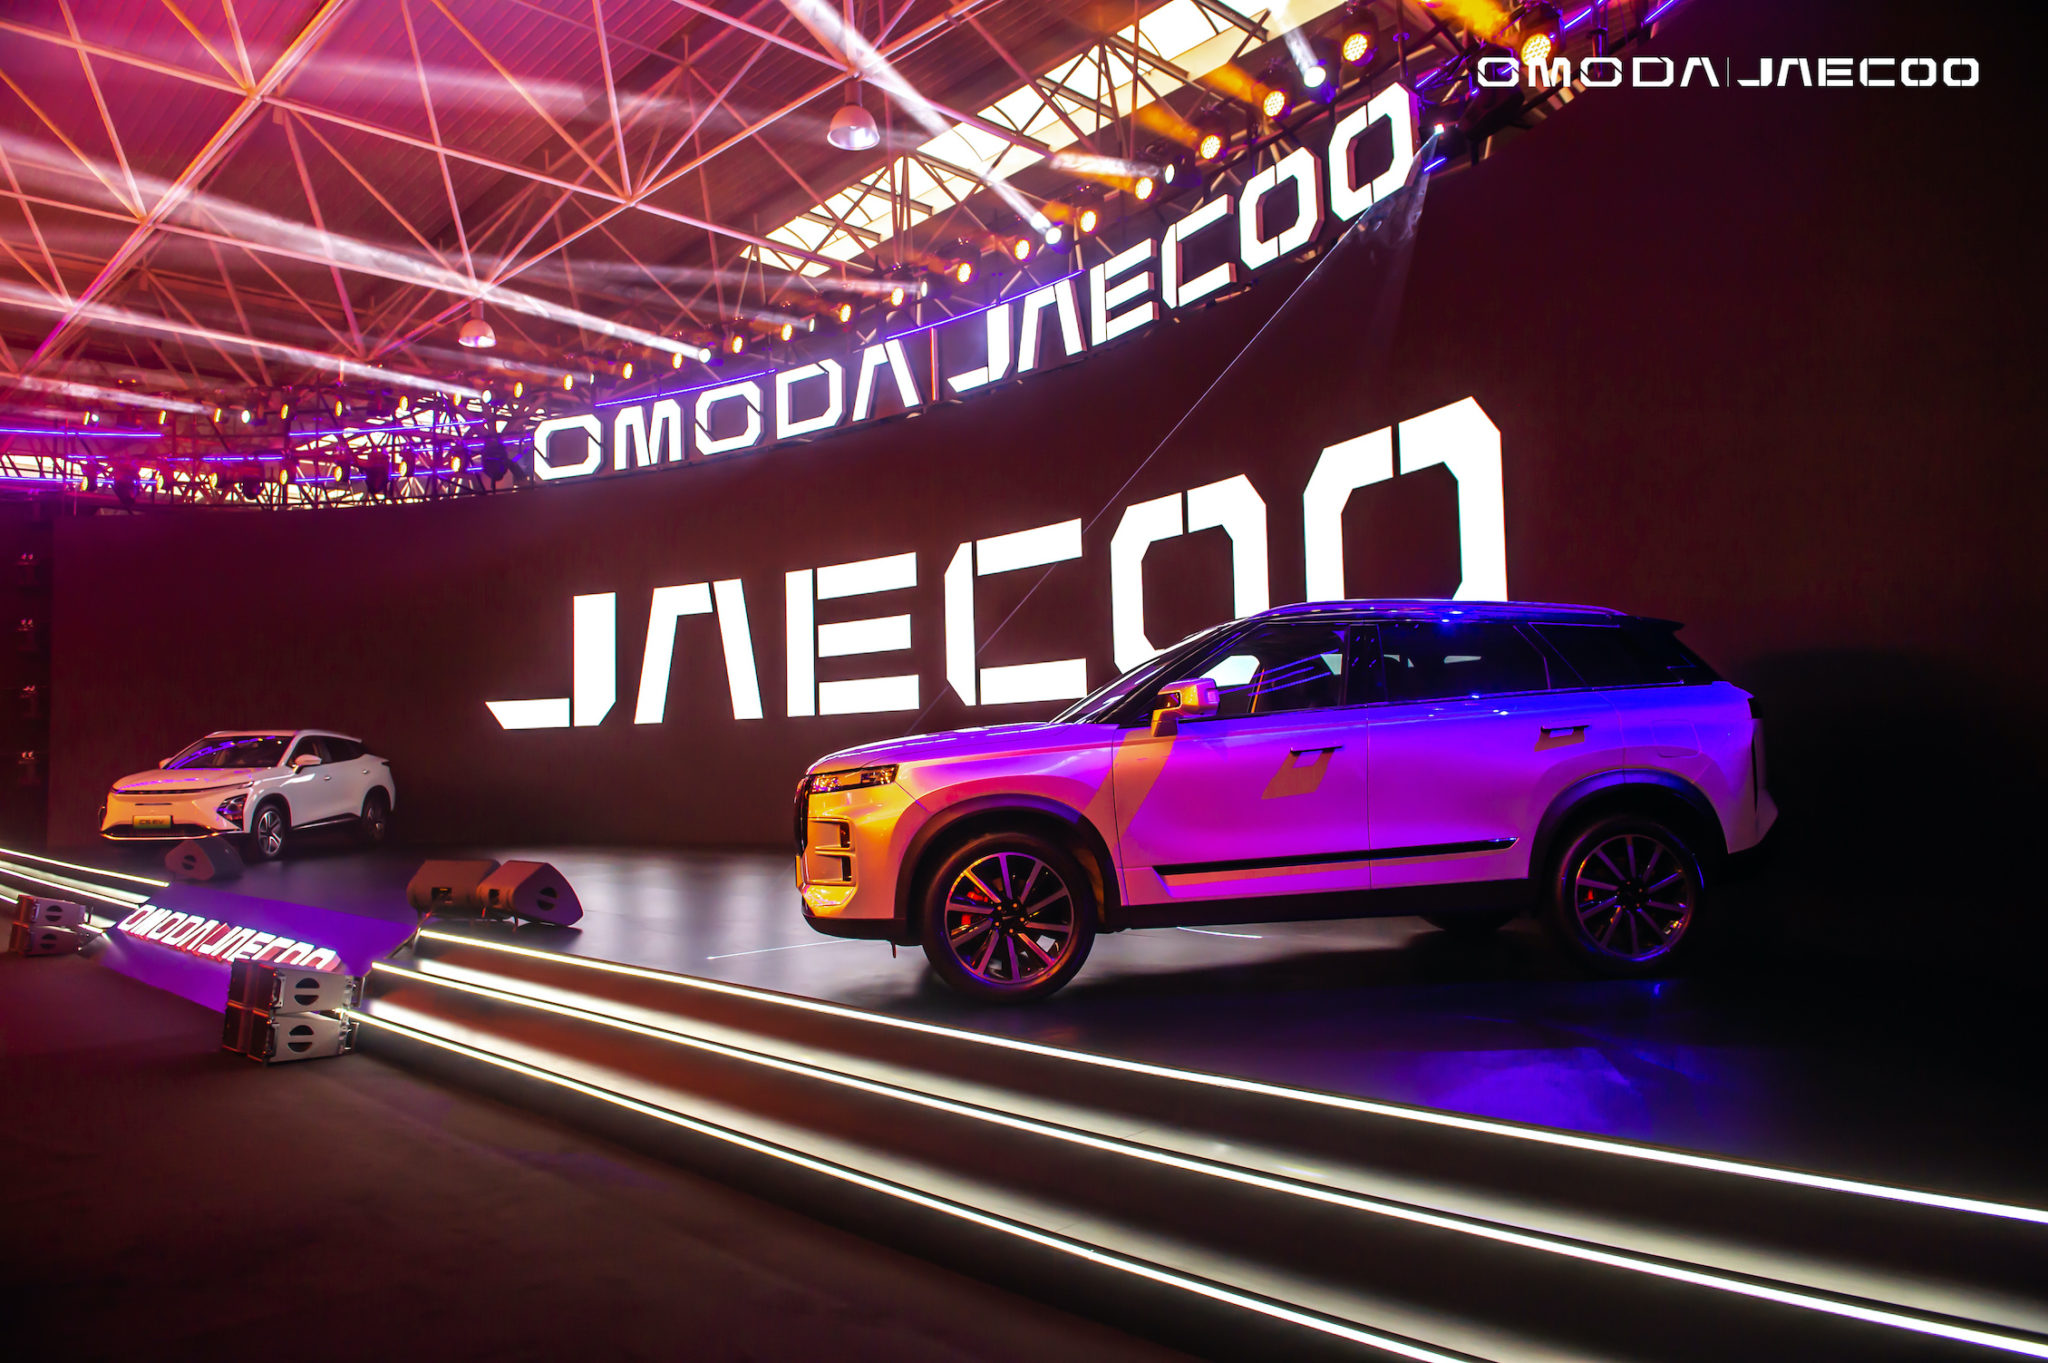 WATCH: Chery sets record straight on incoming Jaecoo brand | The Citizen